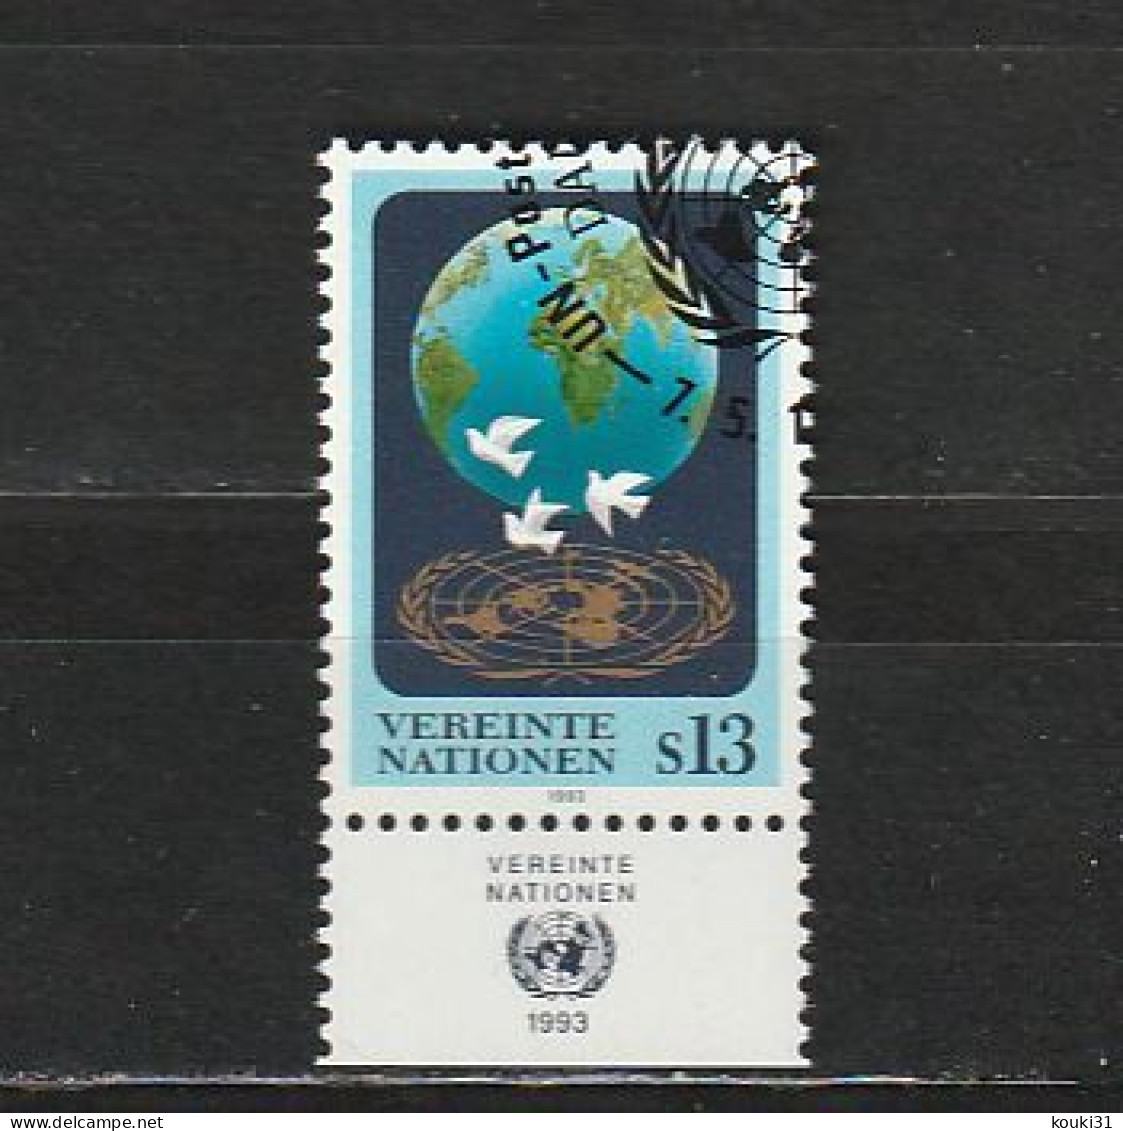 Nations Unies (Vienne) YT 165 Obl : Colombe - 1993 - Usados